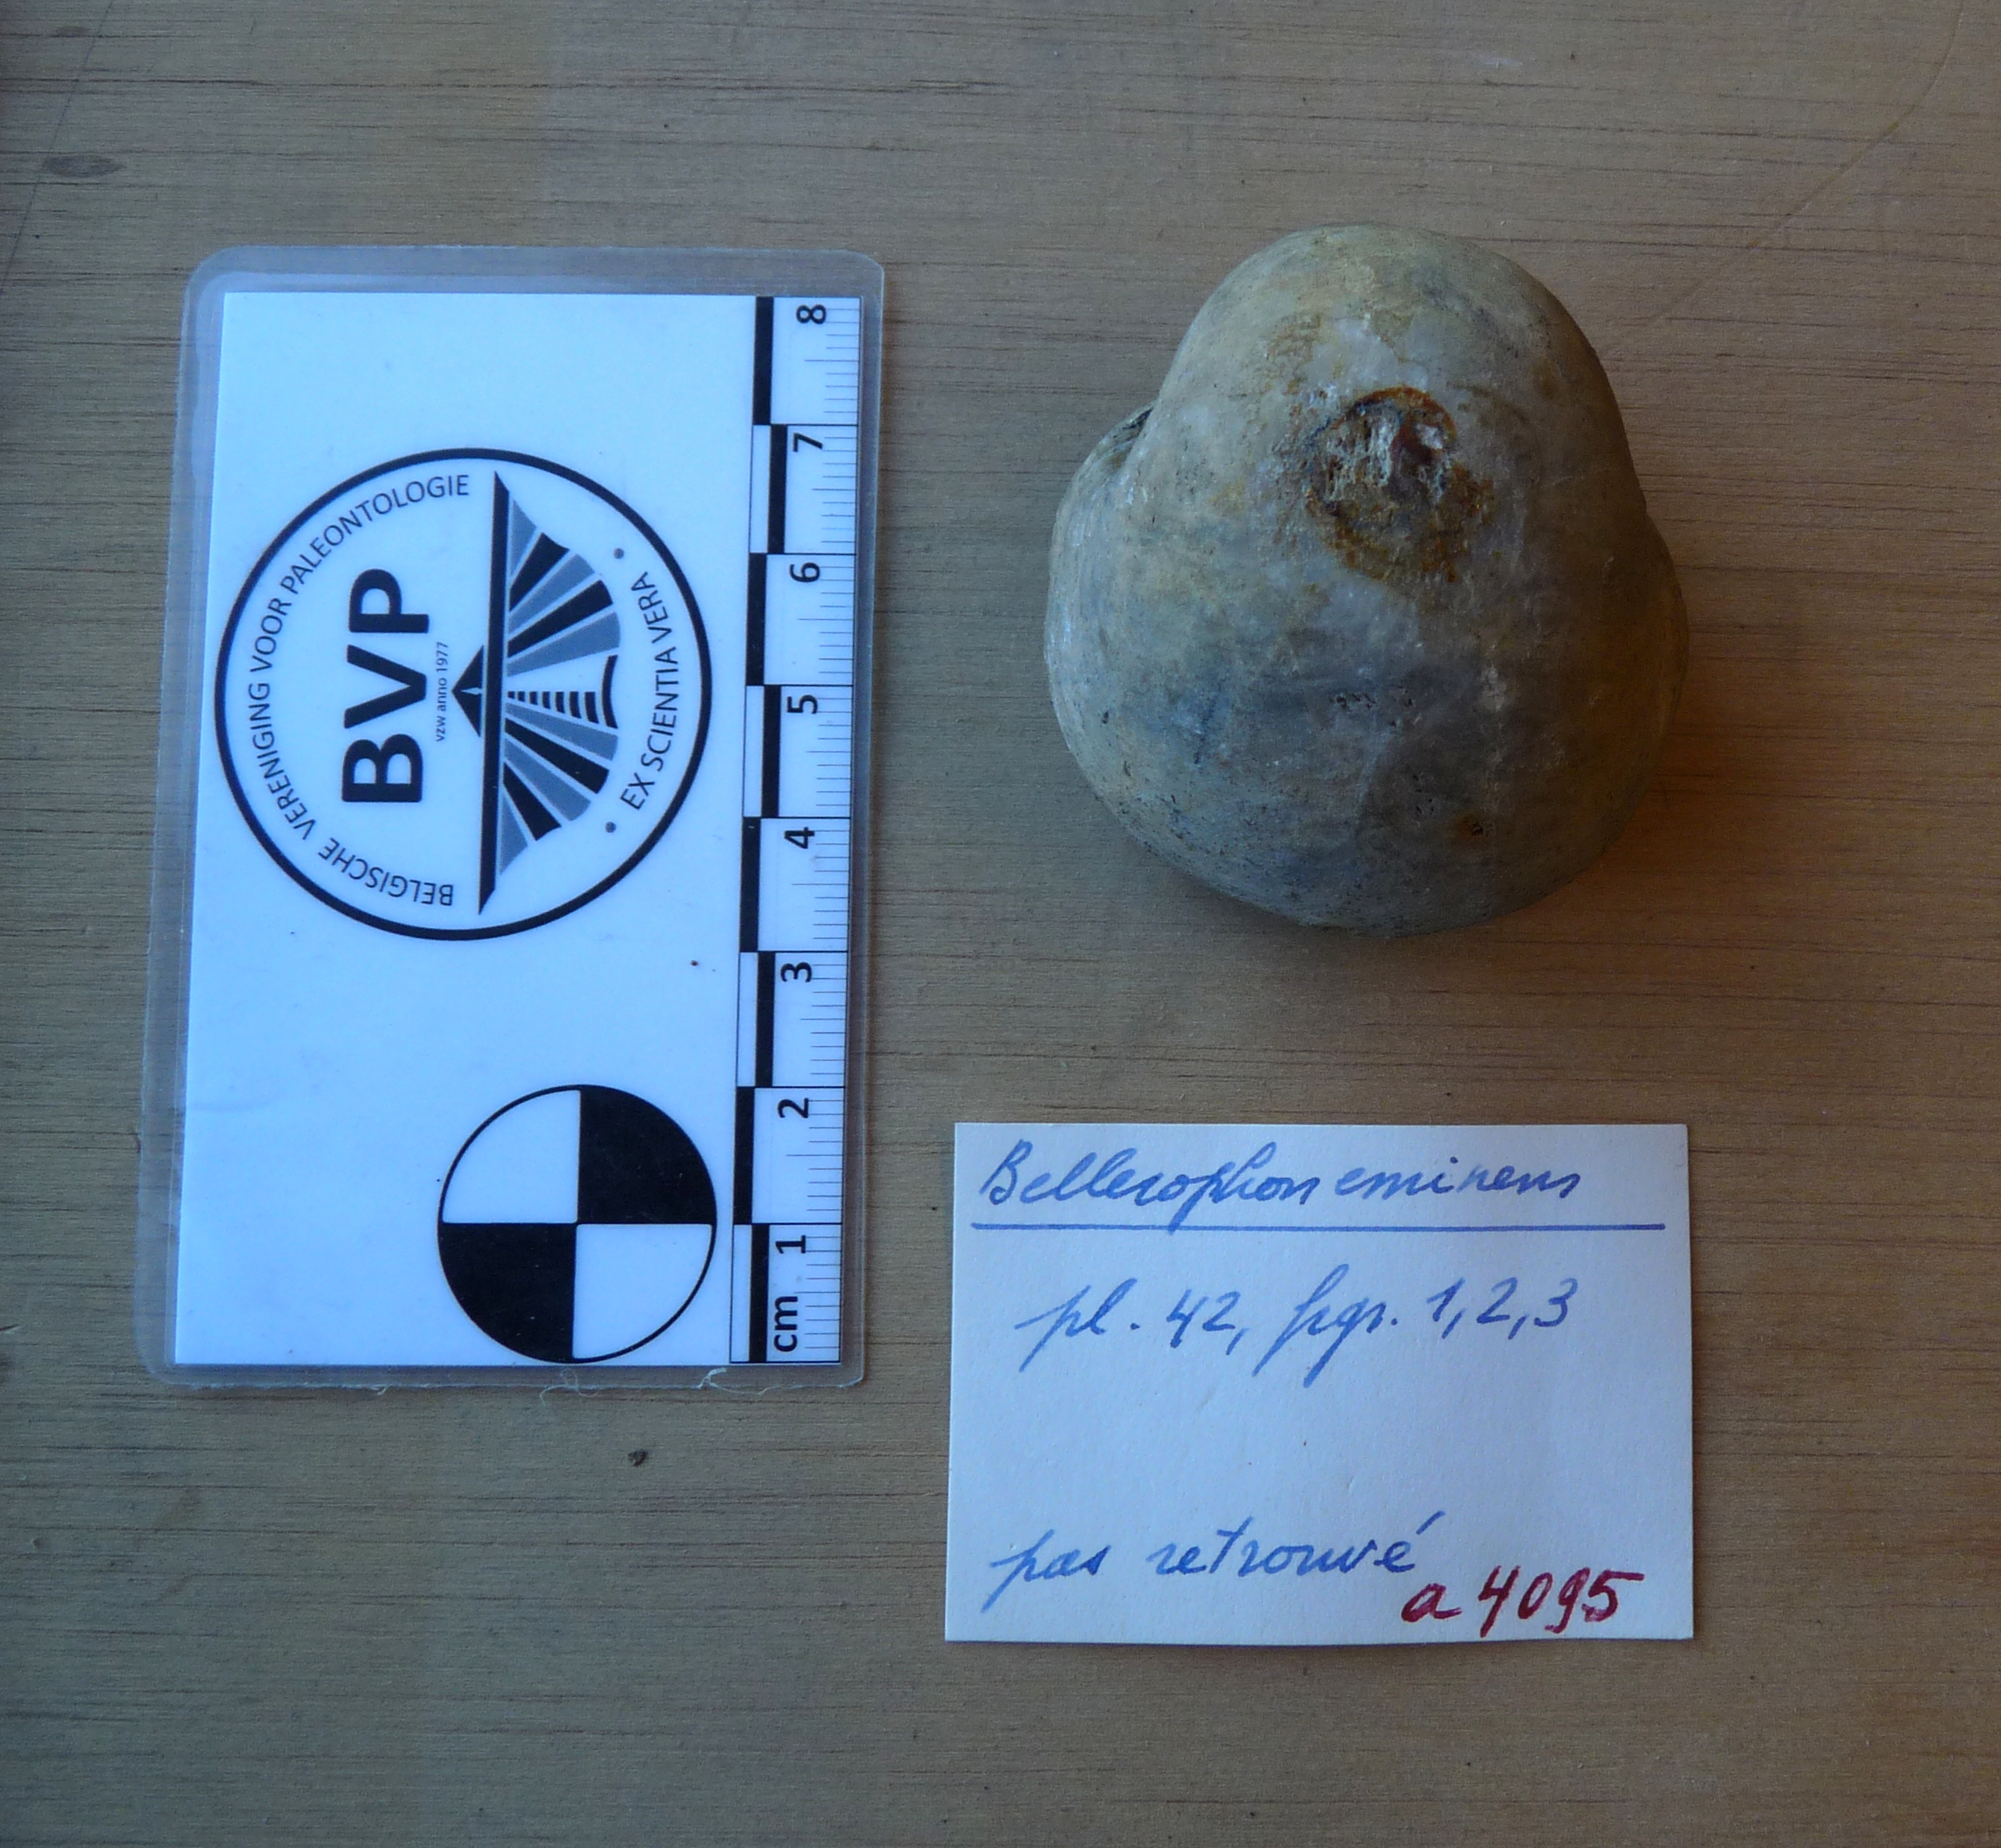 General view of the specimen and the labels